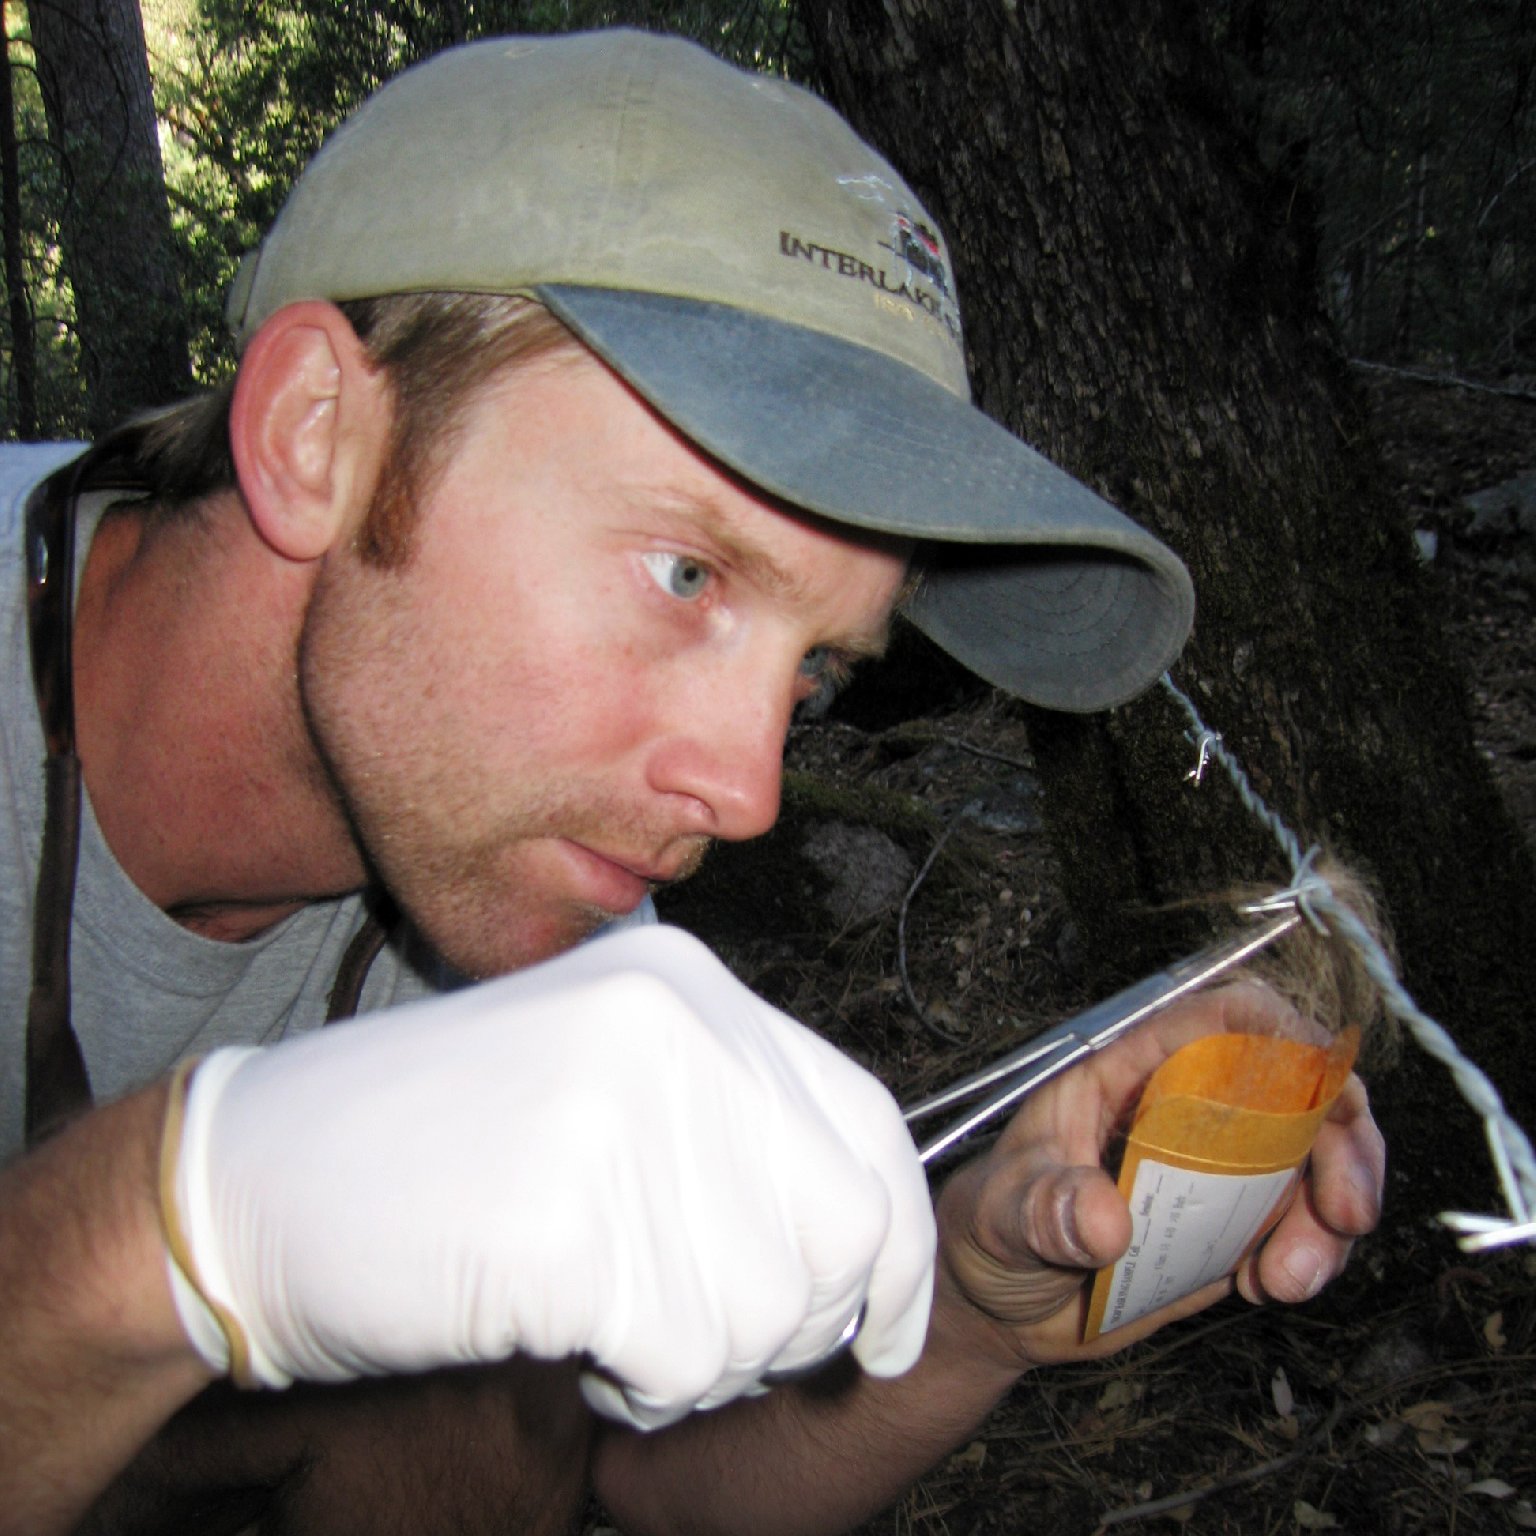 Researcher Jack Hopkins used barbed-wire snares to collect hair samples from bears in Yosemite. Analysis of isotope ratios in hair samples showed how much of the bears' diets came from human food. Photo: Courtesy of Jack Hopkins